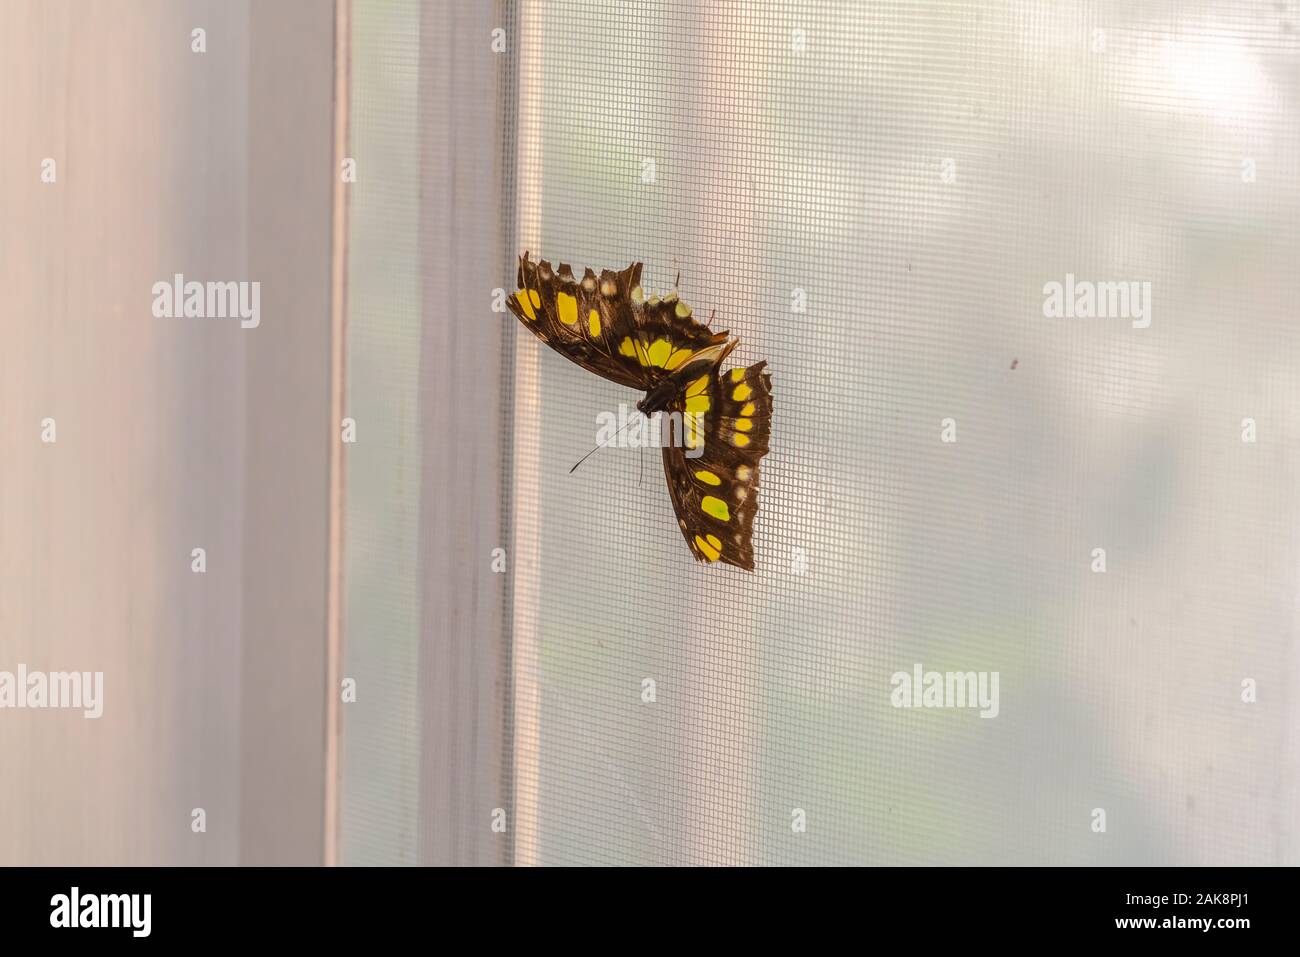 Close up view of a beautiful butterfly against a wire mesh window screen Stock Photo